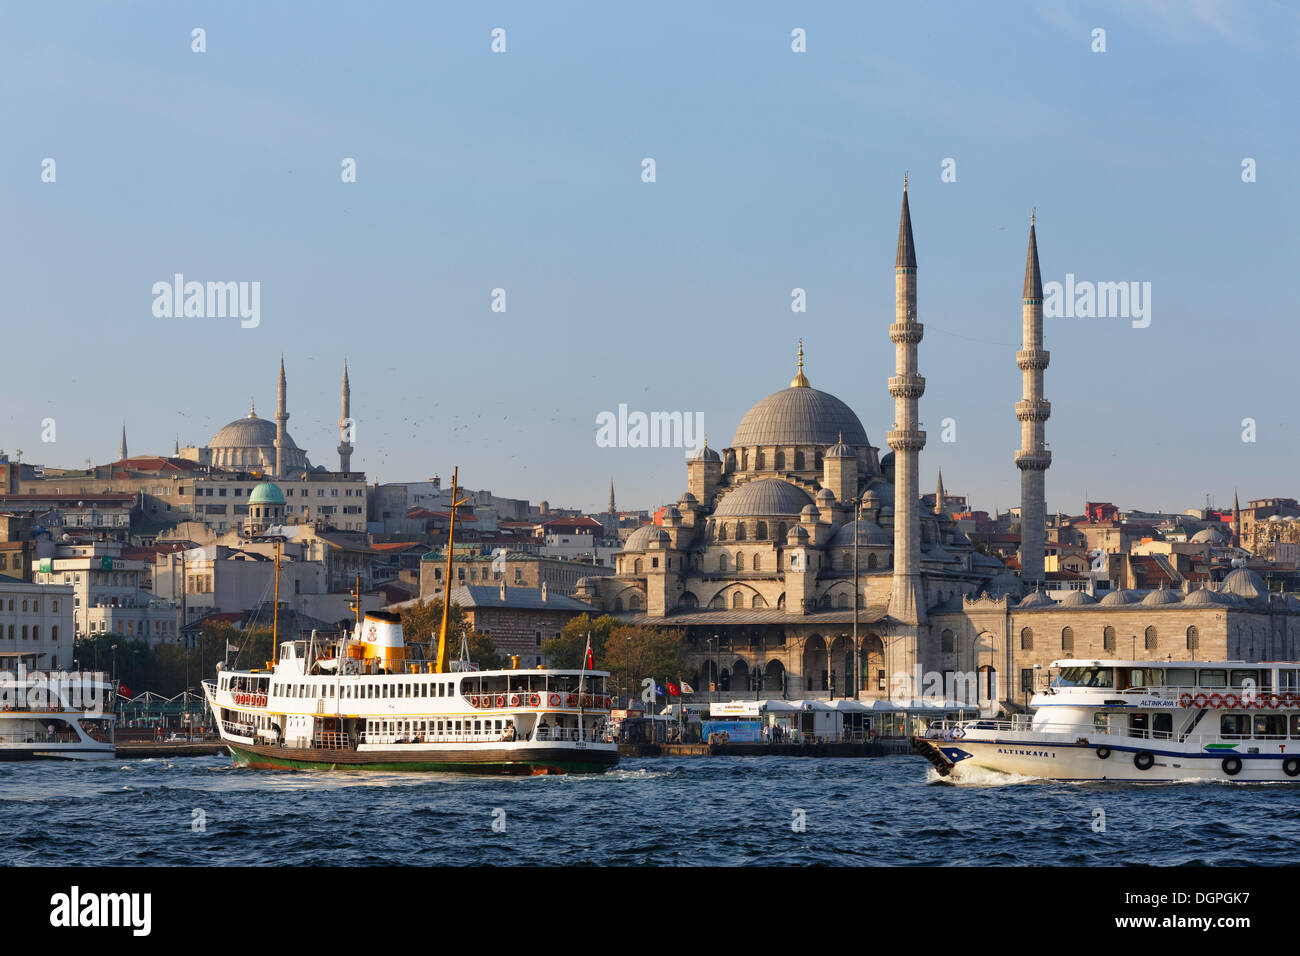 New Mosque, Yeni Cami, Eminoenue ferry port, Golden Horn, the Nuruosmaniye Mosque at the back on the left, Istanbul Stock Photo